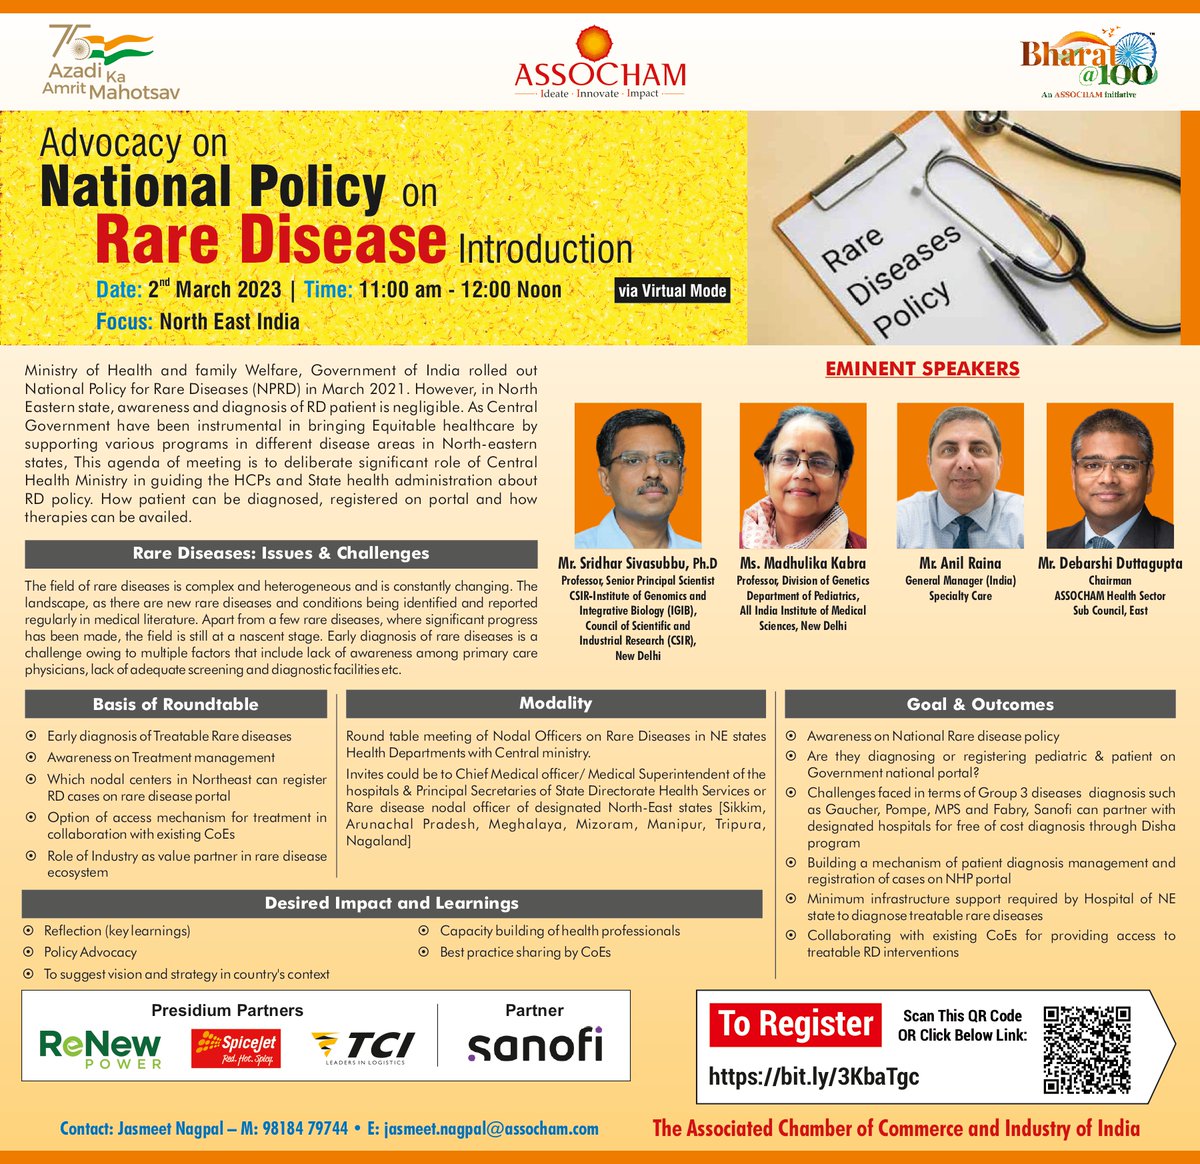 Awareness of rare diseases needs improvement as is the diagnosis. This is true for all states and truer for NE states. Supplementing with the Centre's efforts, #ASSOCHAM is deliberating among experts to set out the way forward. #healthcare #health #raredisease #NPRD